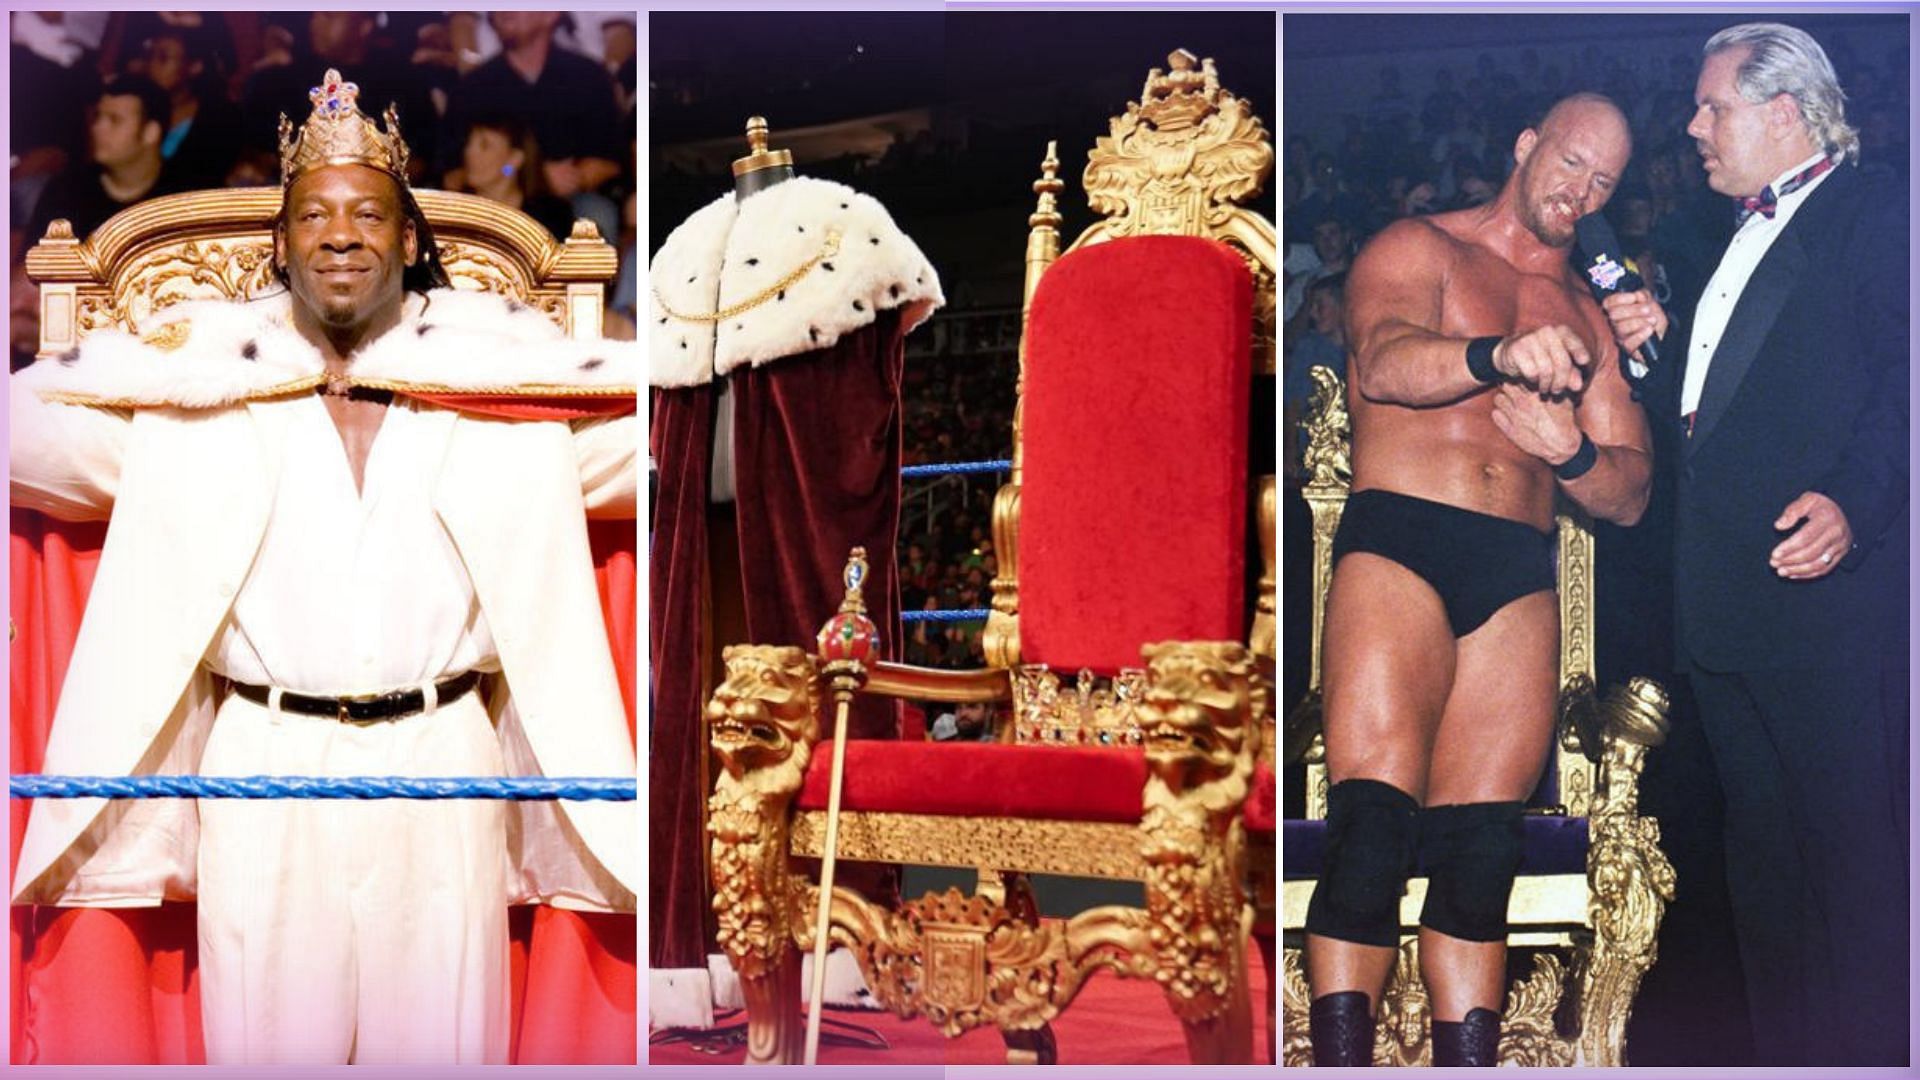 WWF King of the Ring 1995